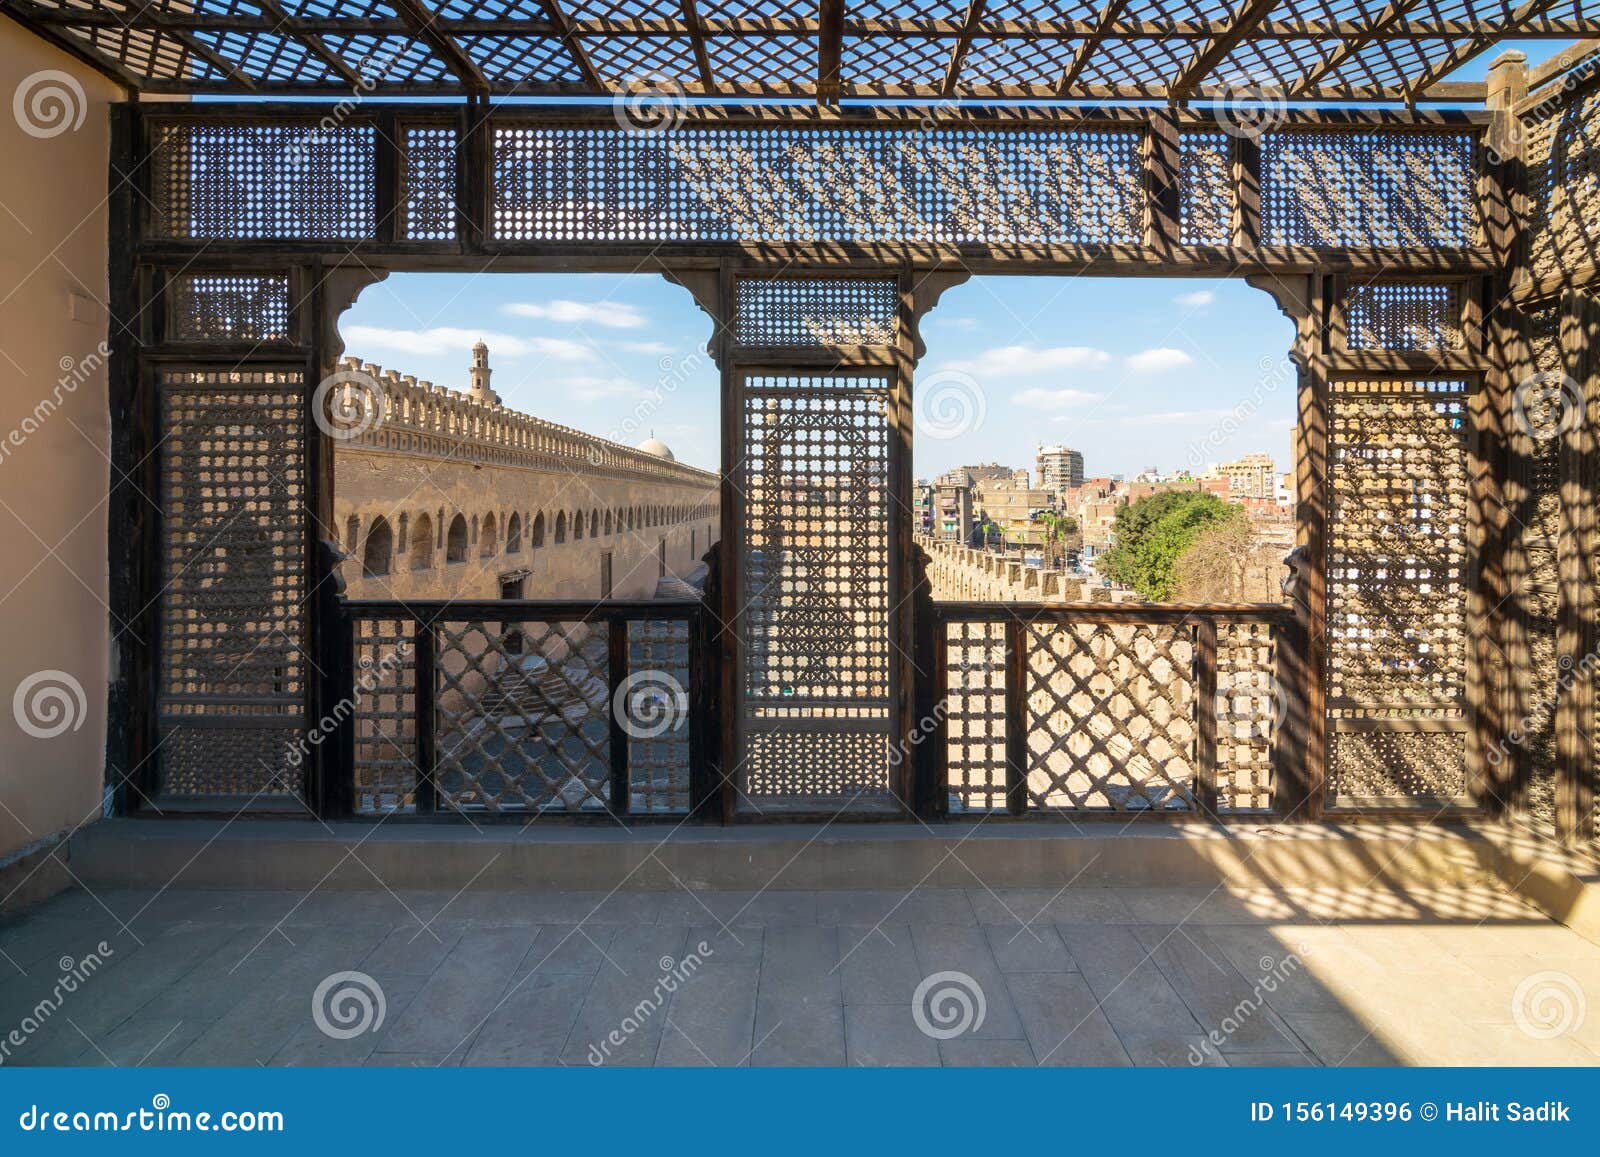 passage surrounding the mosque of ibn tulun framed by wooden window, mashrabiya, cairo, egypt